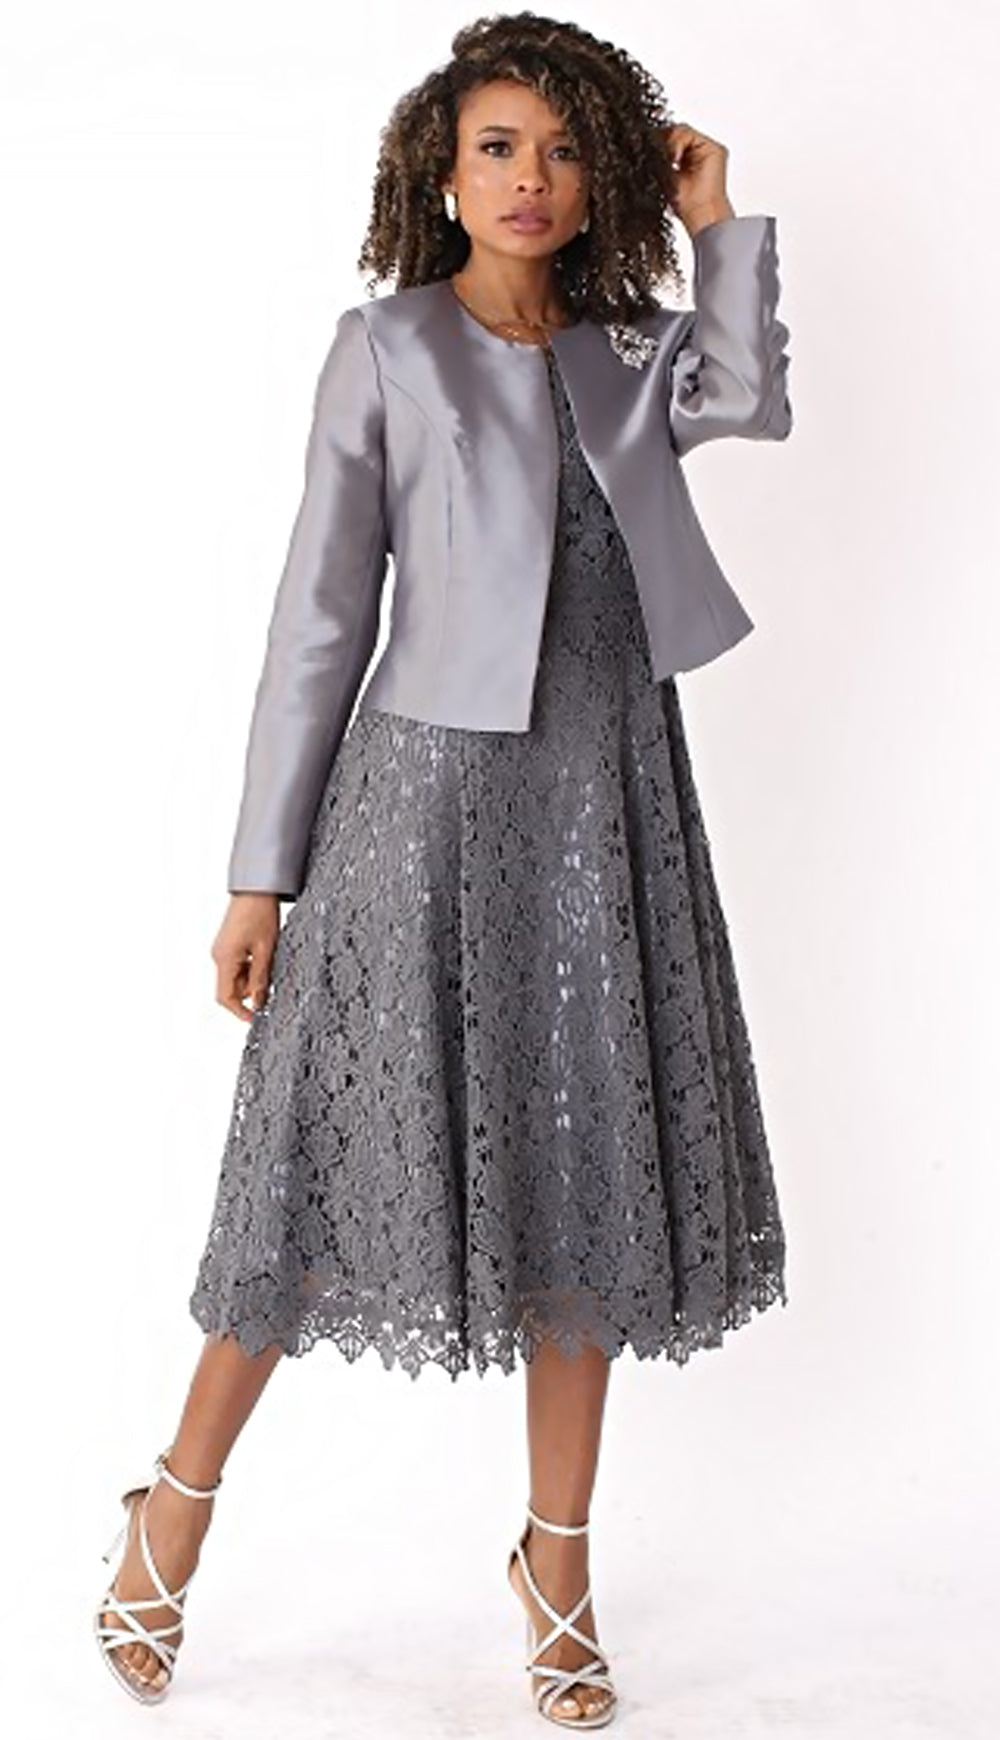 Tally Taylor Dress 4529-Silver - Church Suits For Less